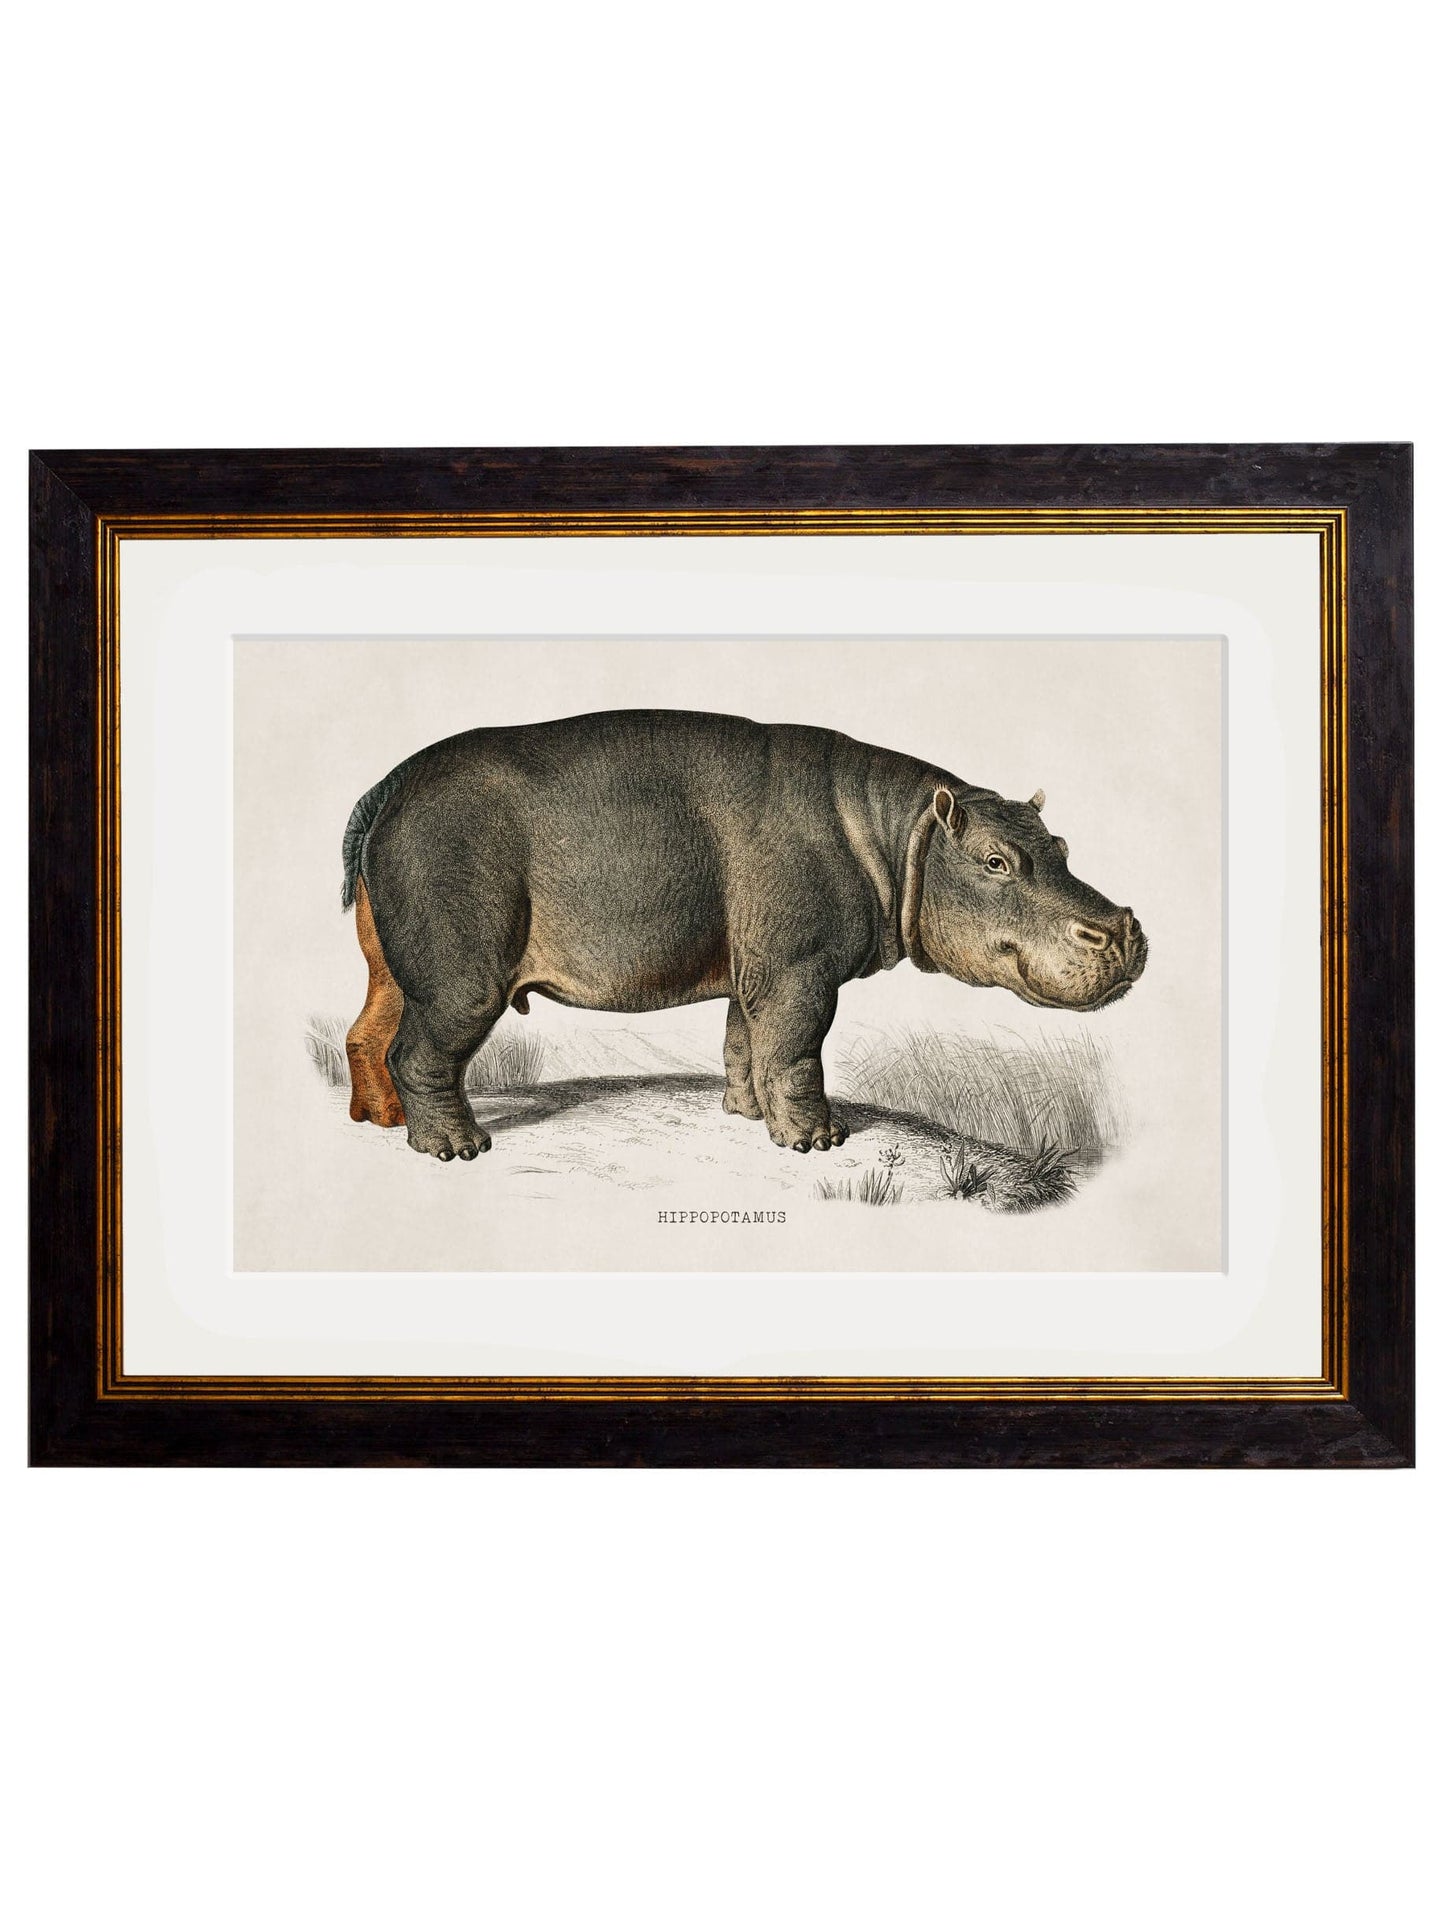 C.1846 Hippo for sale - Woodcock and Cavendish